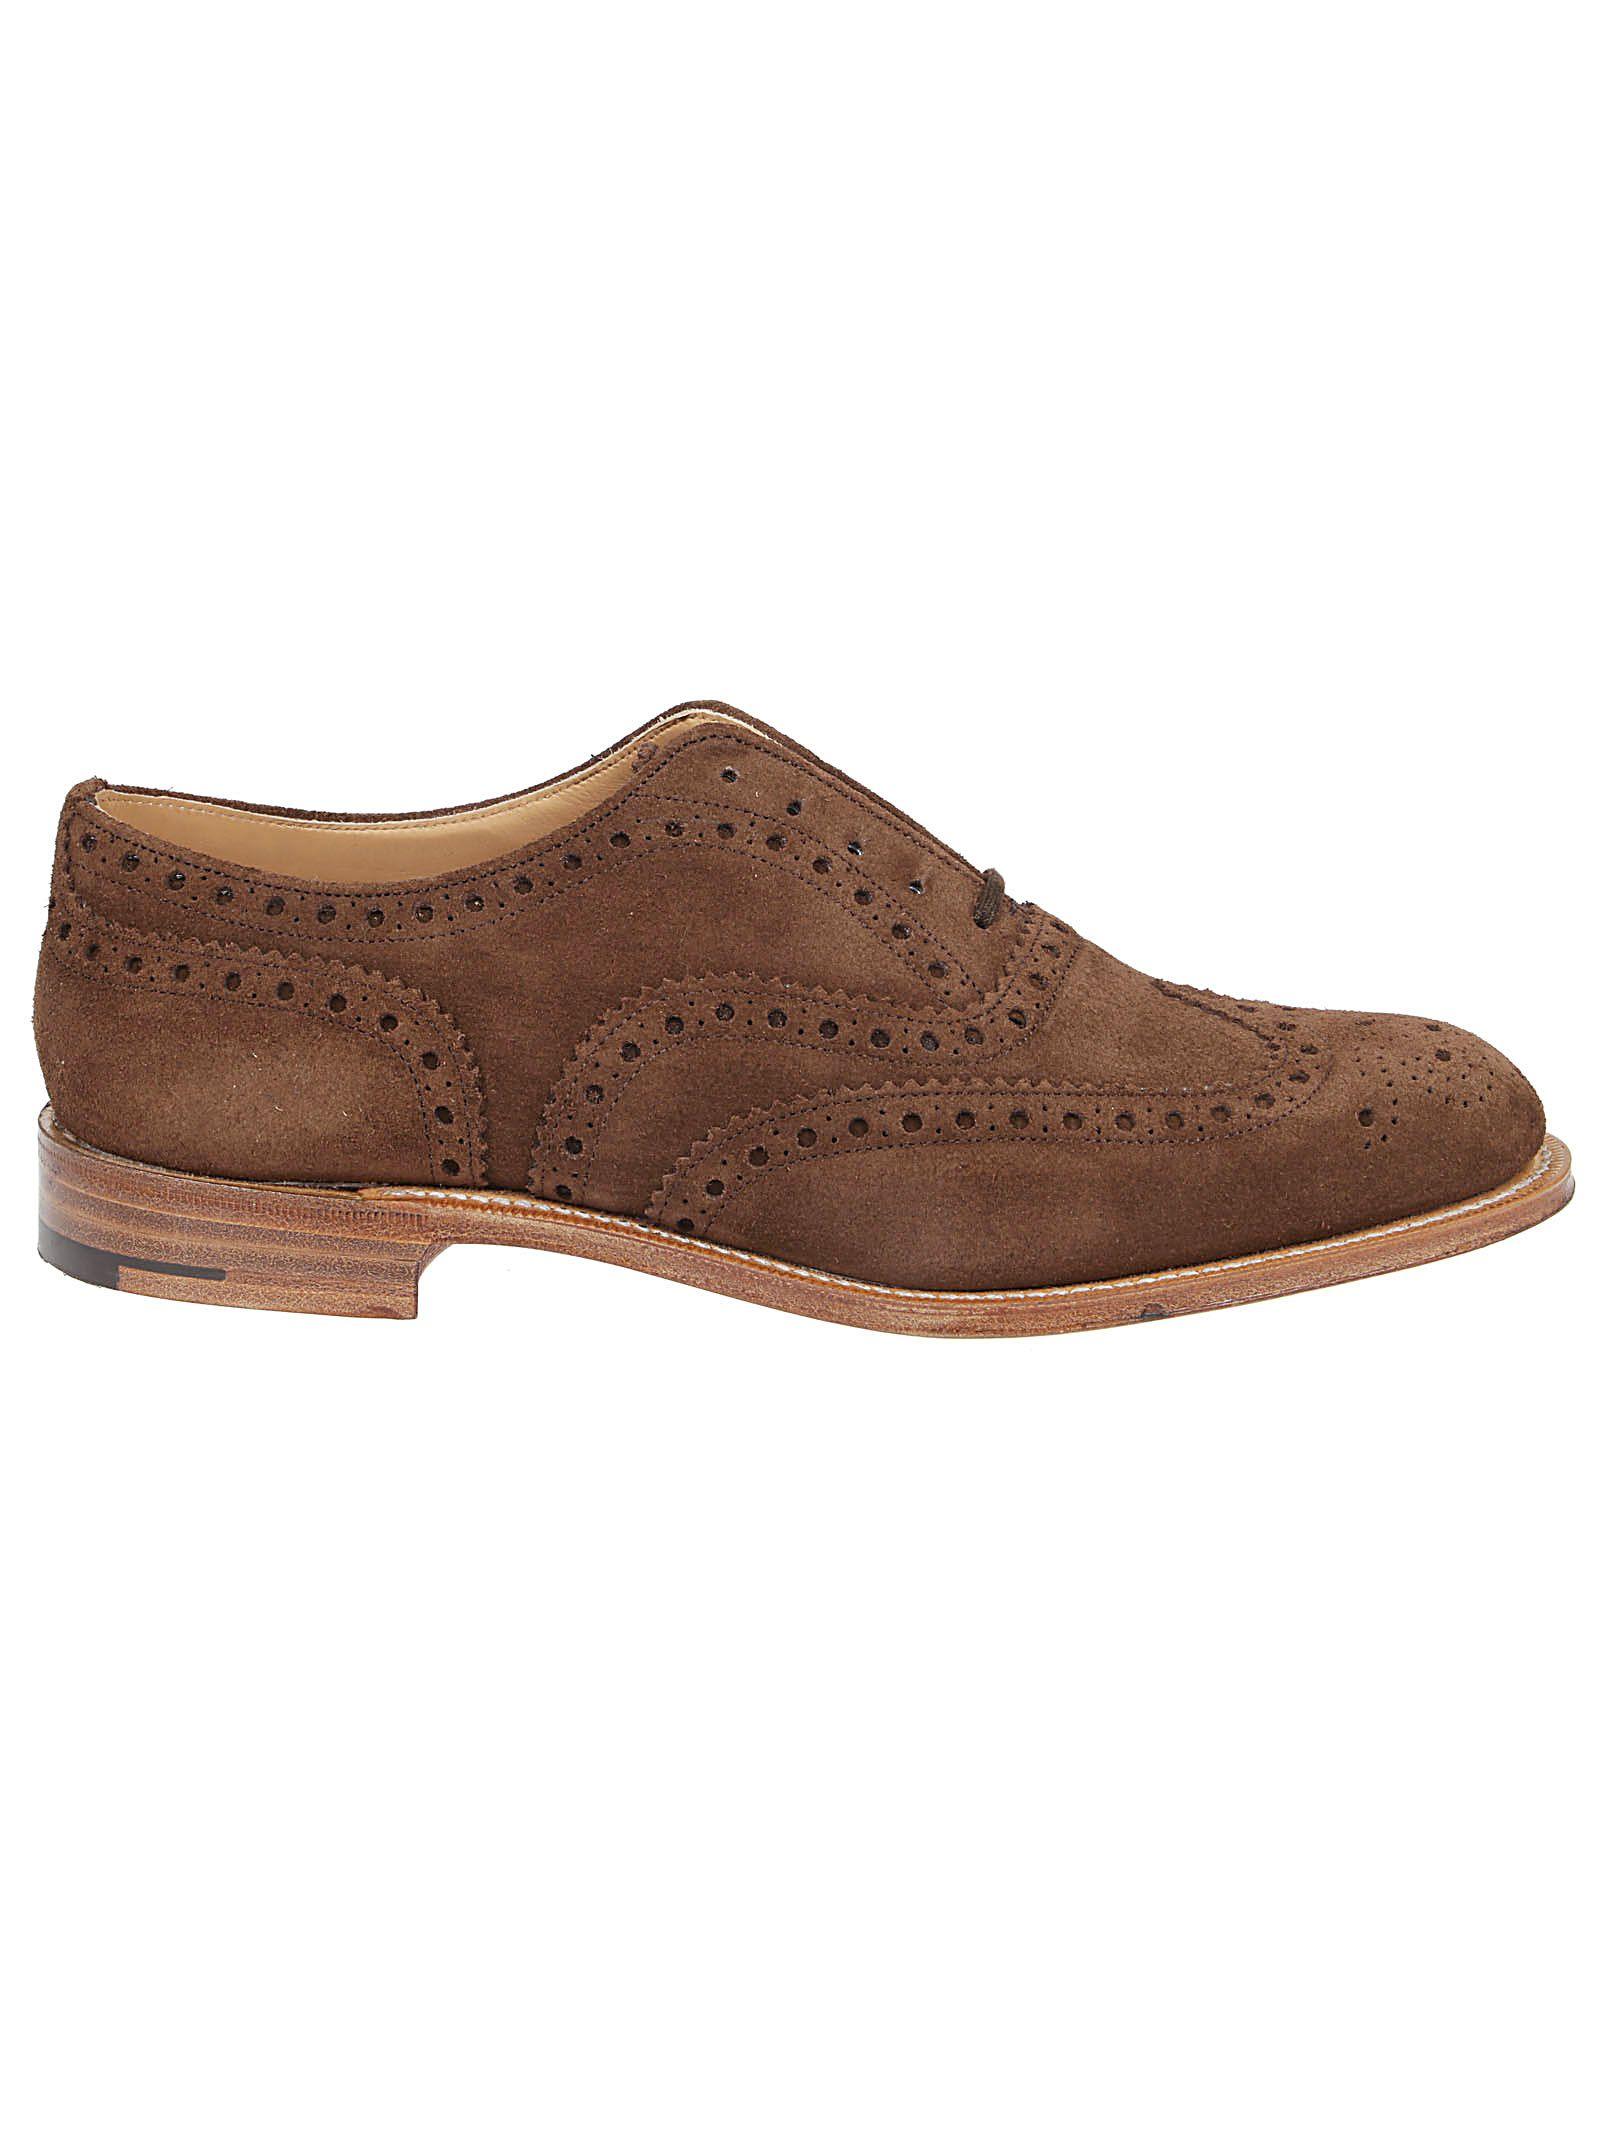 Church's Suede Lace-up Shoes in Brown for Men - Lyst